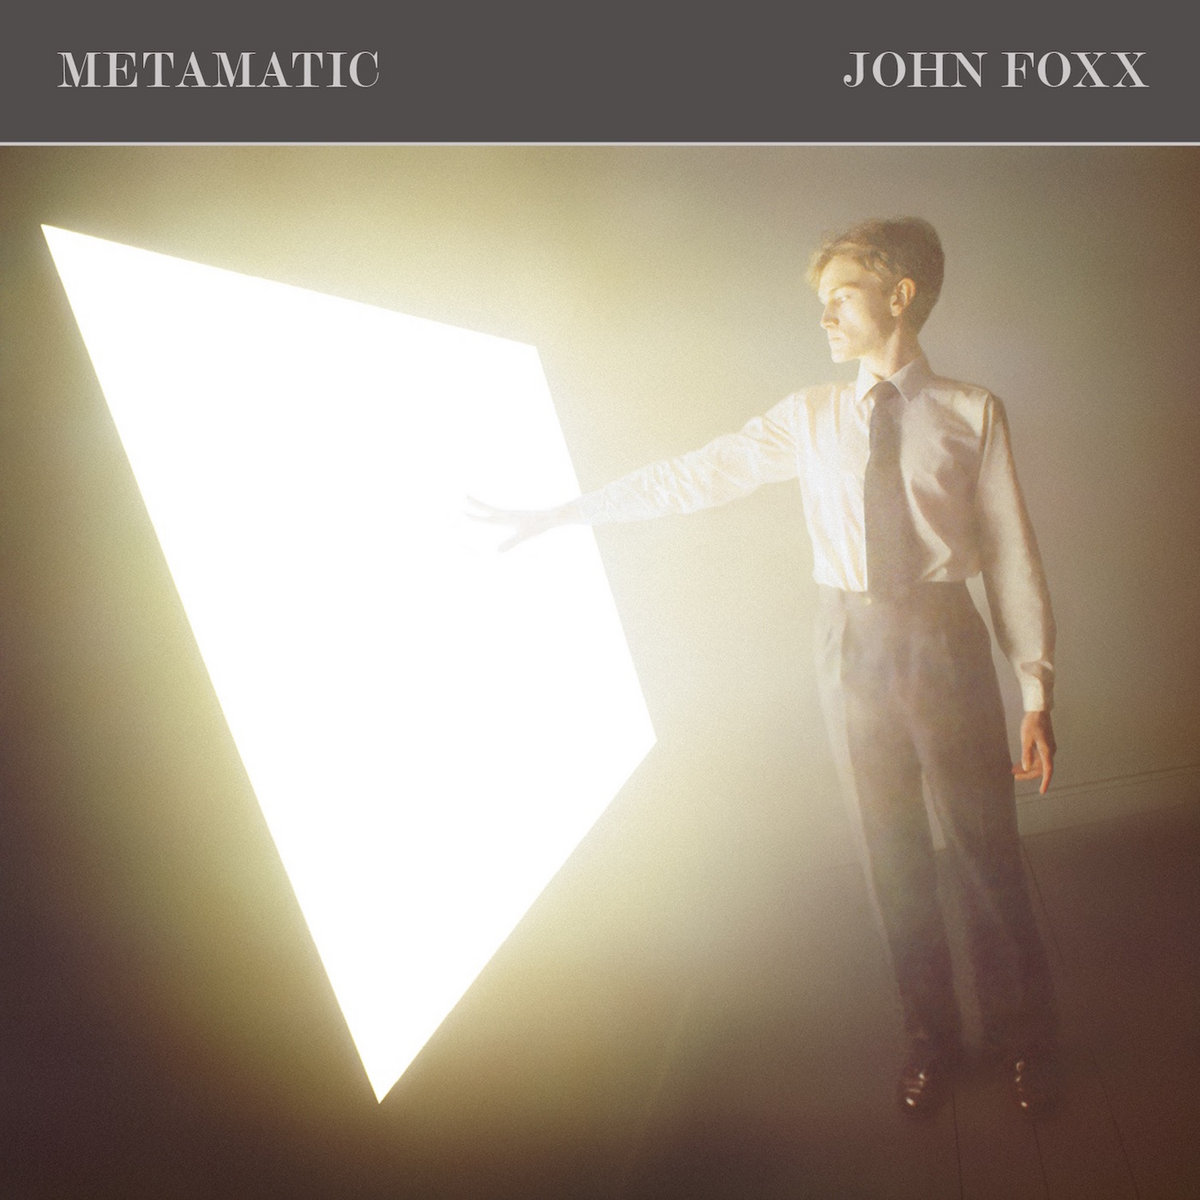 Album of the Day 545 #NowPlaying️ 
John Foxx - Metamatic
What a cracking album. Underrated - it should have been bigger. It is a perfect example of 80s synth-pop; somehow both cold yet emotional. If you haven't heard it, you really should give it a spin.